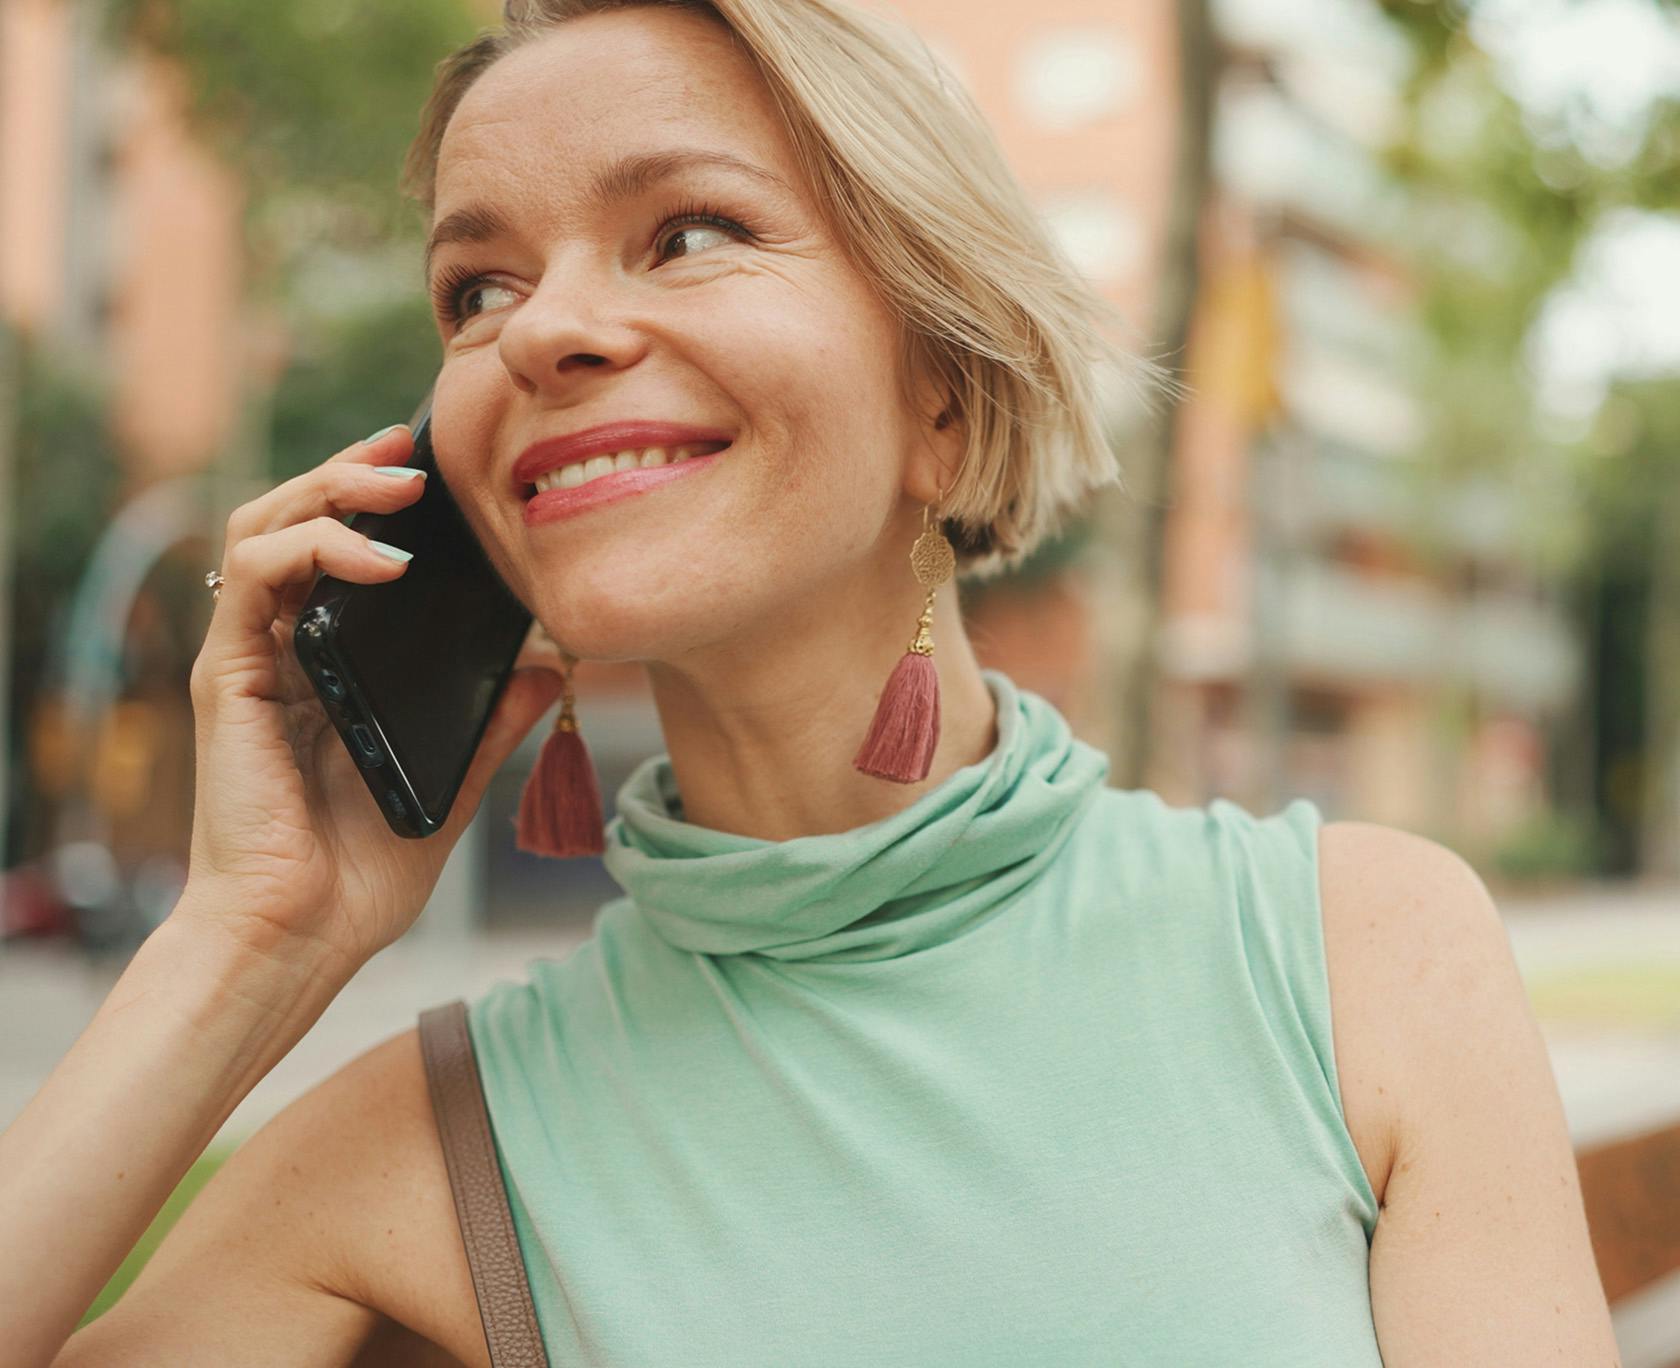 blond woman talking on cell phone in urban setting with buildings in background